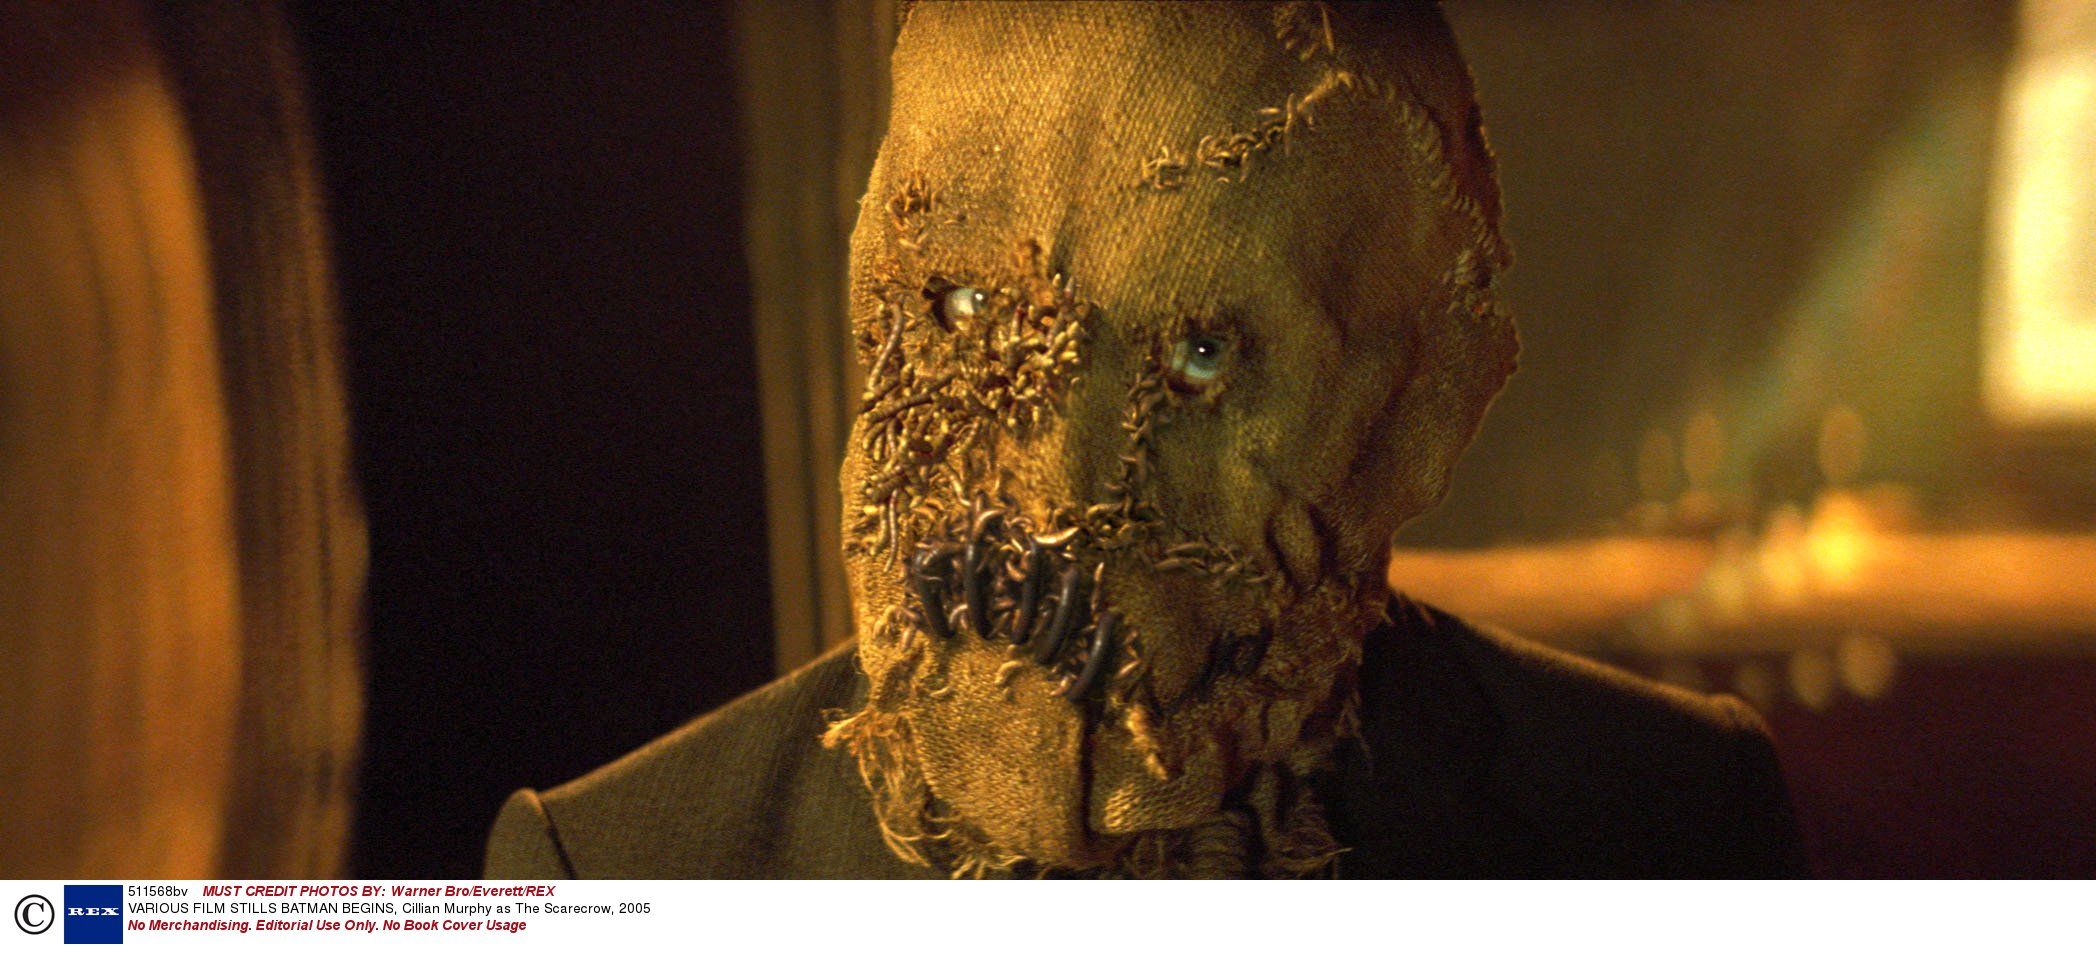 Gotham to introduce The Scarecrow